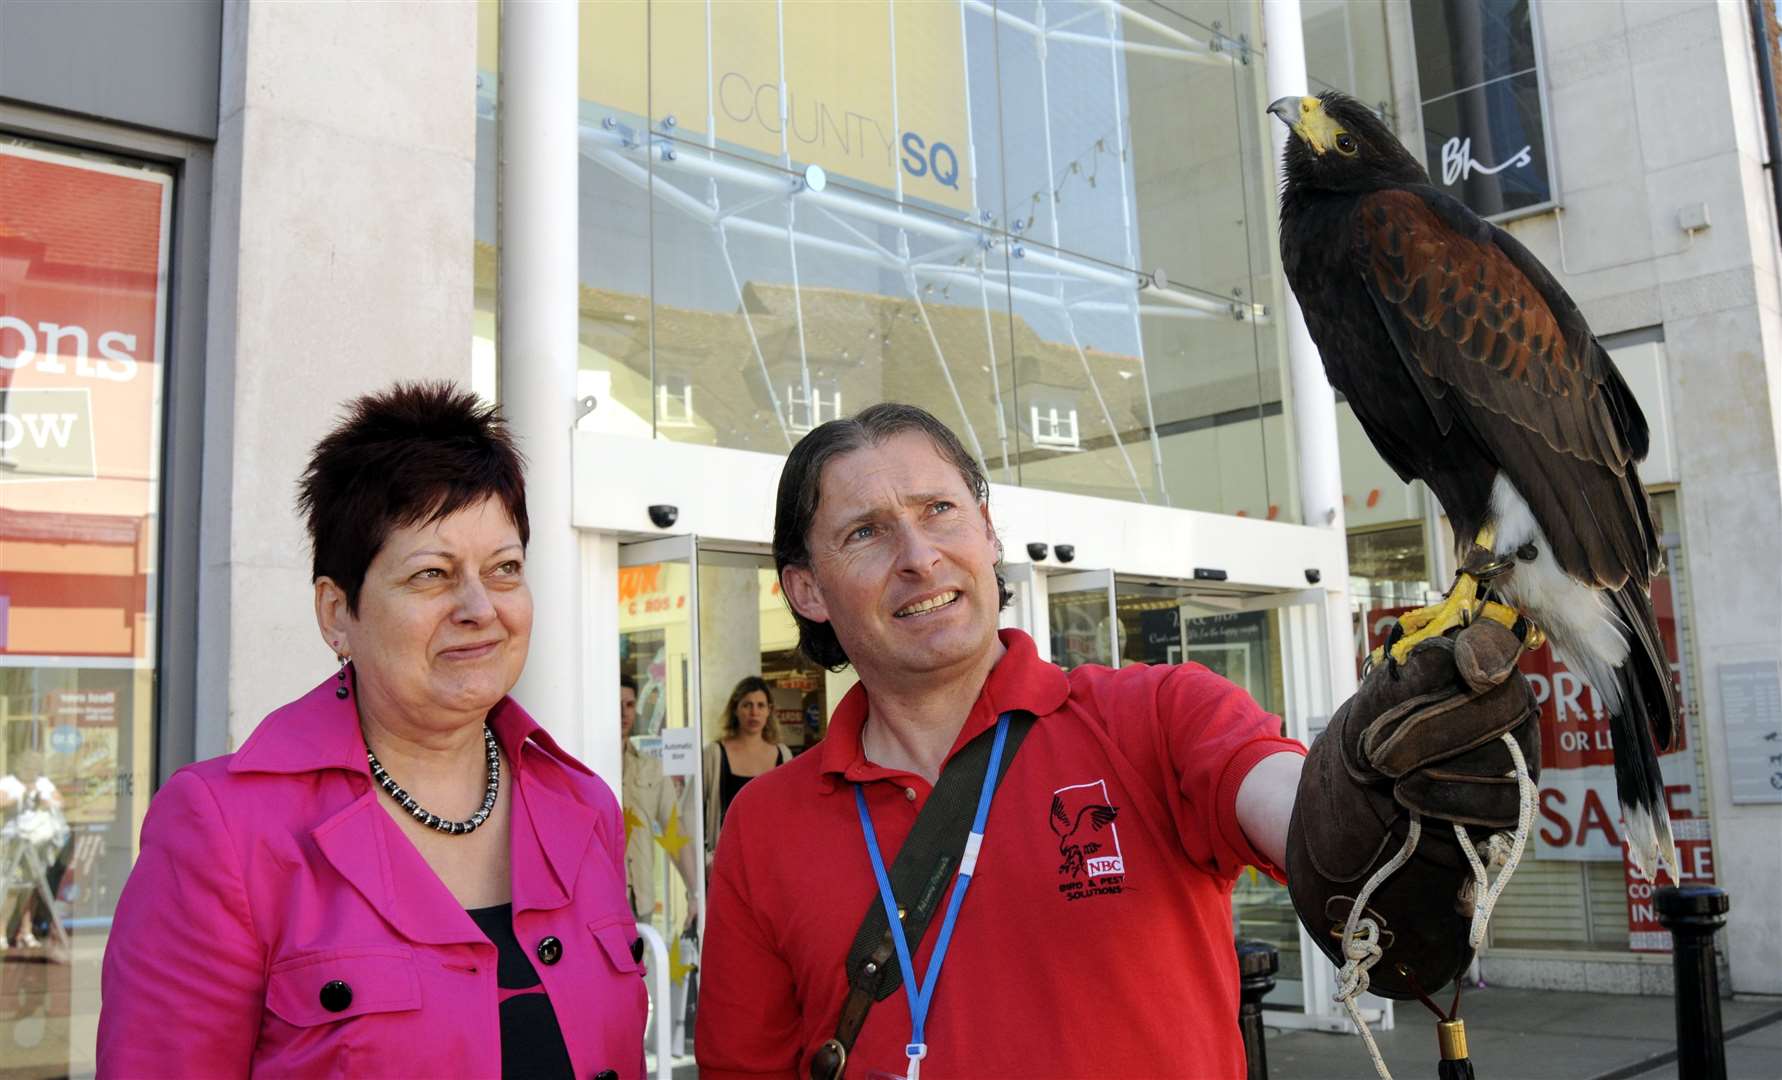 County Square bosses used a hawk in 2010 - this photo shows centre manager Frances Burt with Gary Railton and a male Harris Hawk